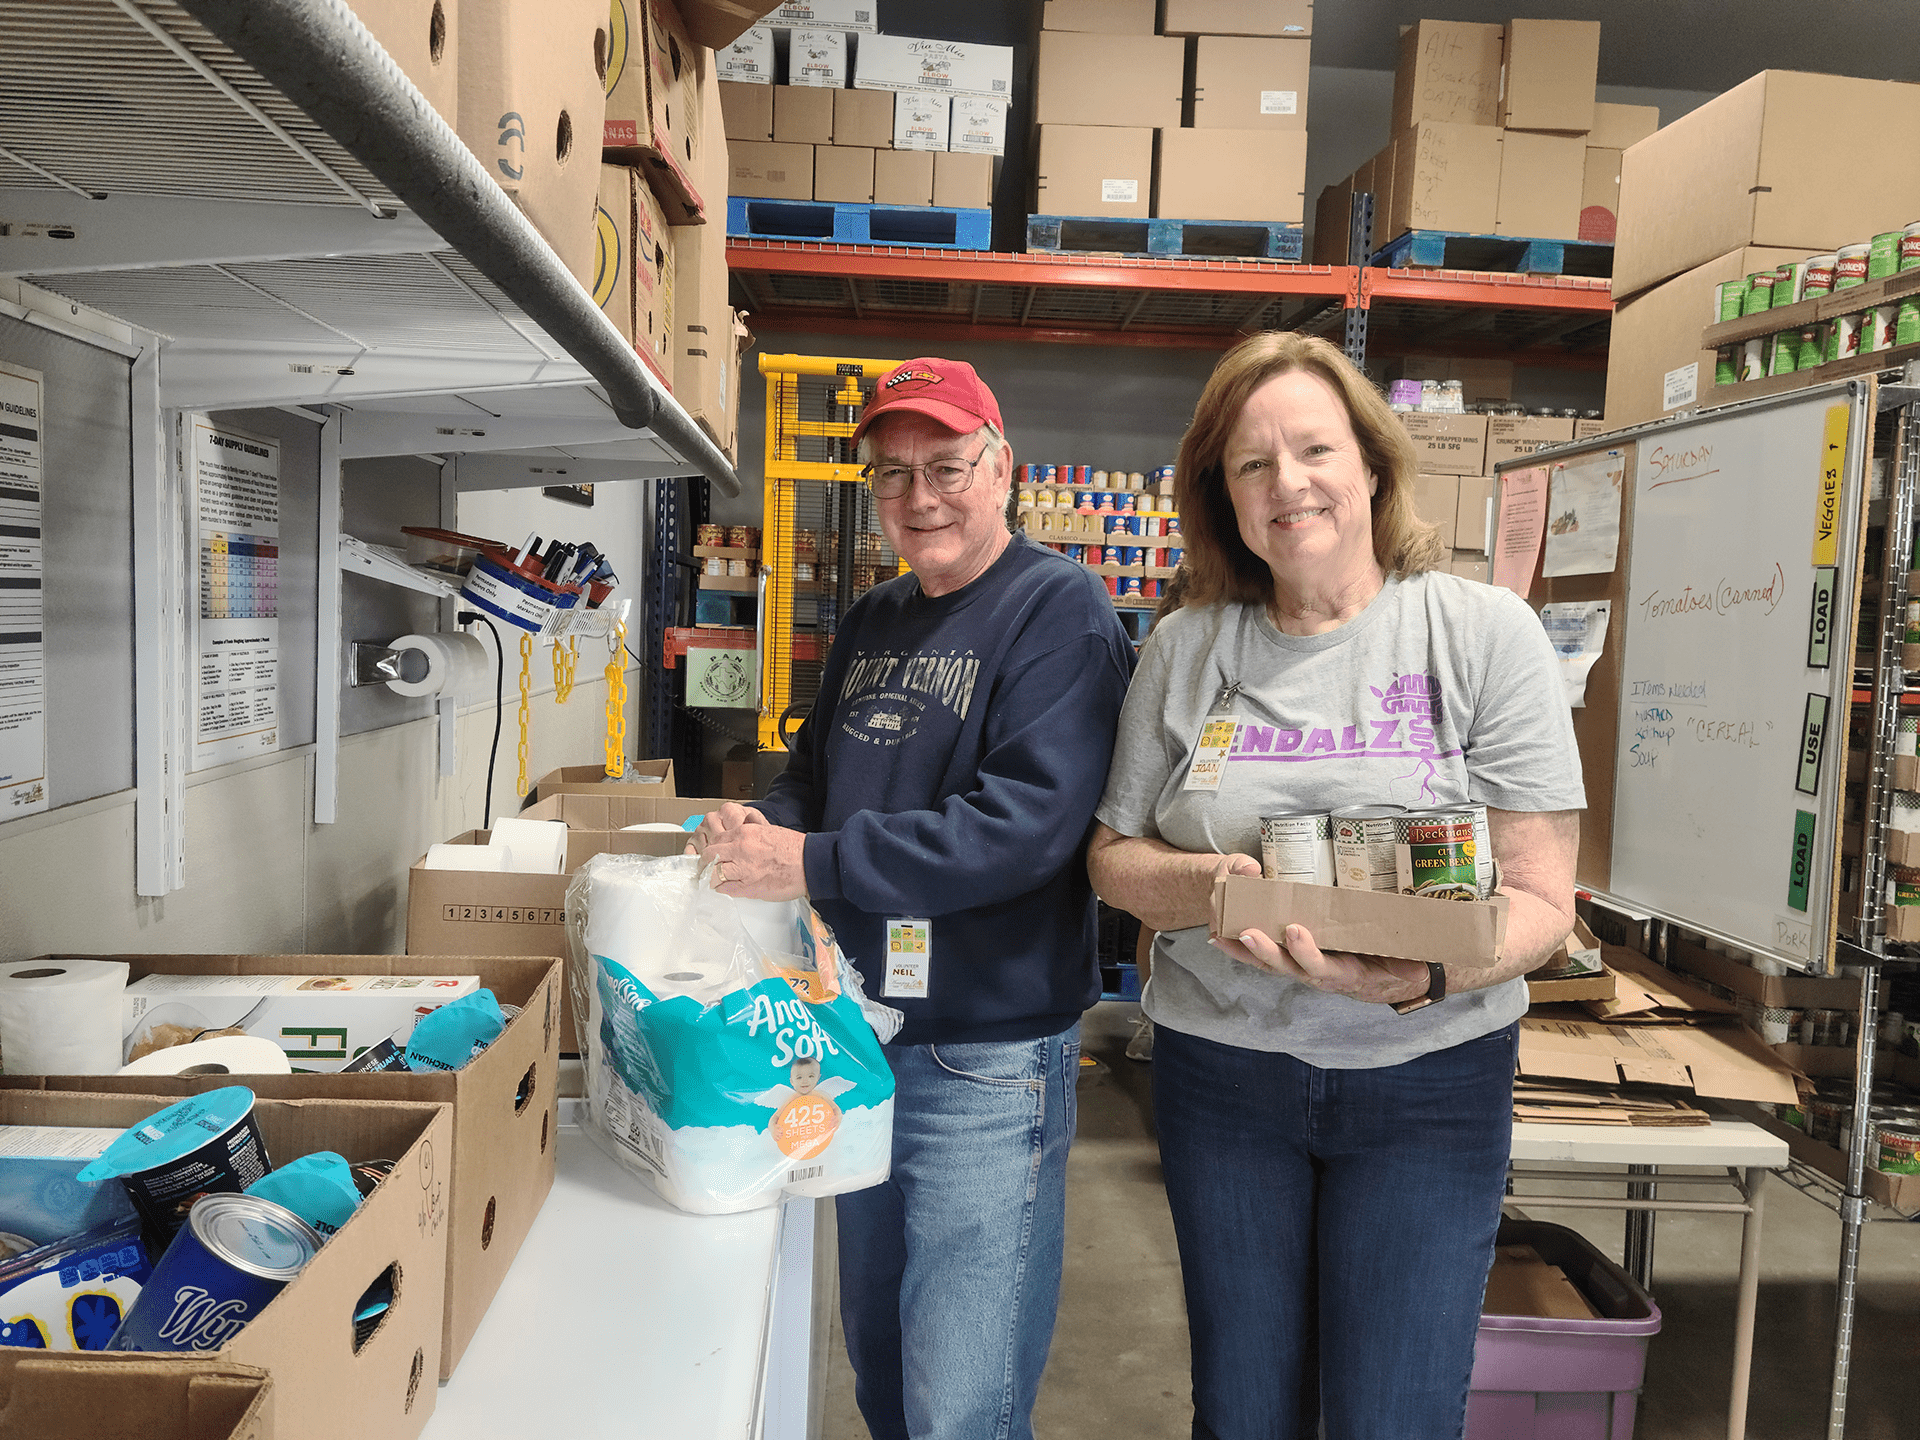 Neil and Joan volunteer at Amazing Grace Food Pantry